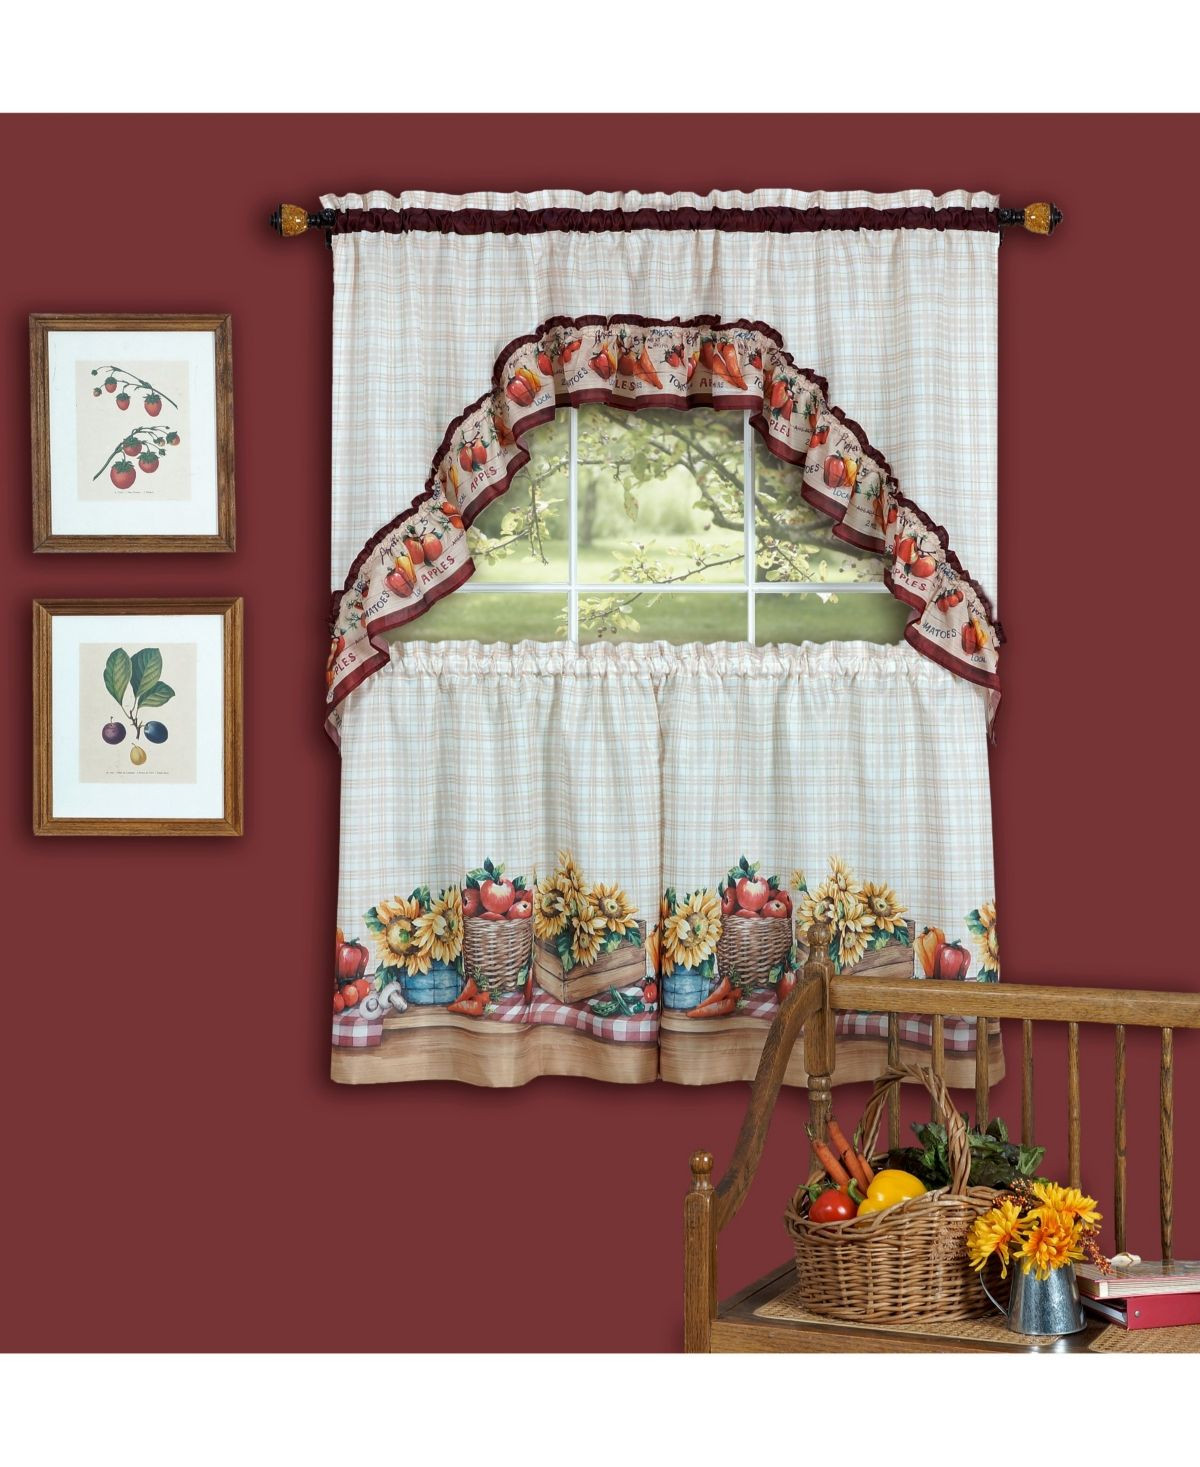 Macy Kitchen Curtains
 Farmer s Market Printed Tier and Swag Window Curtain Set